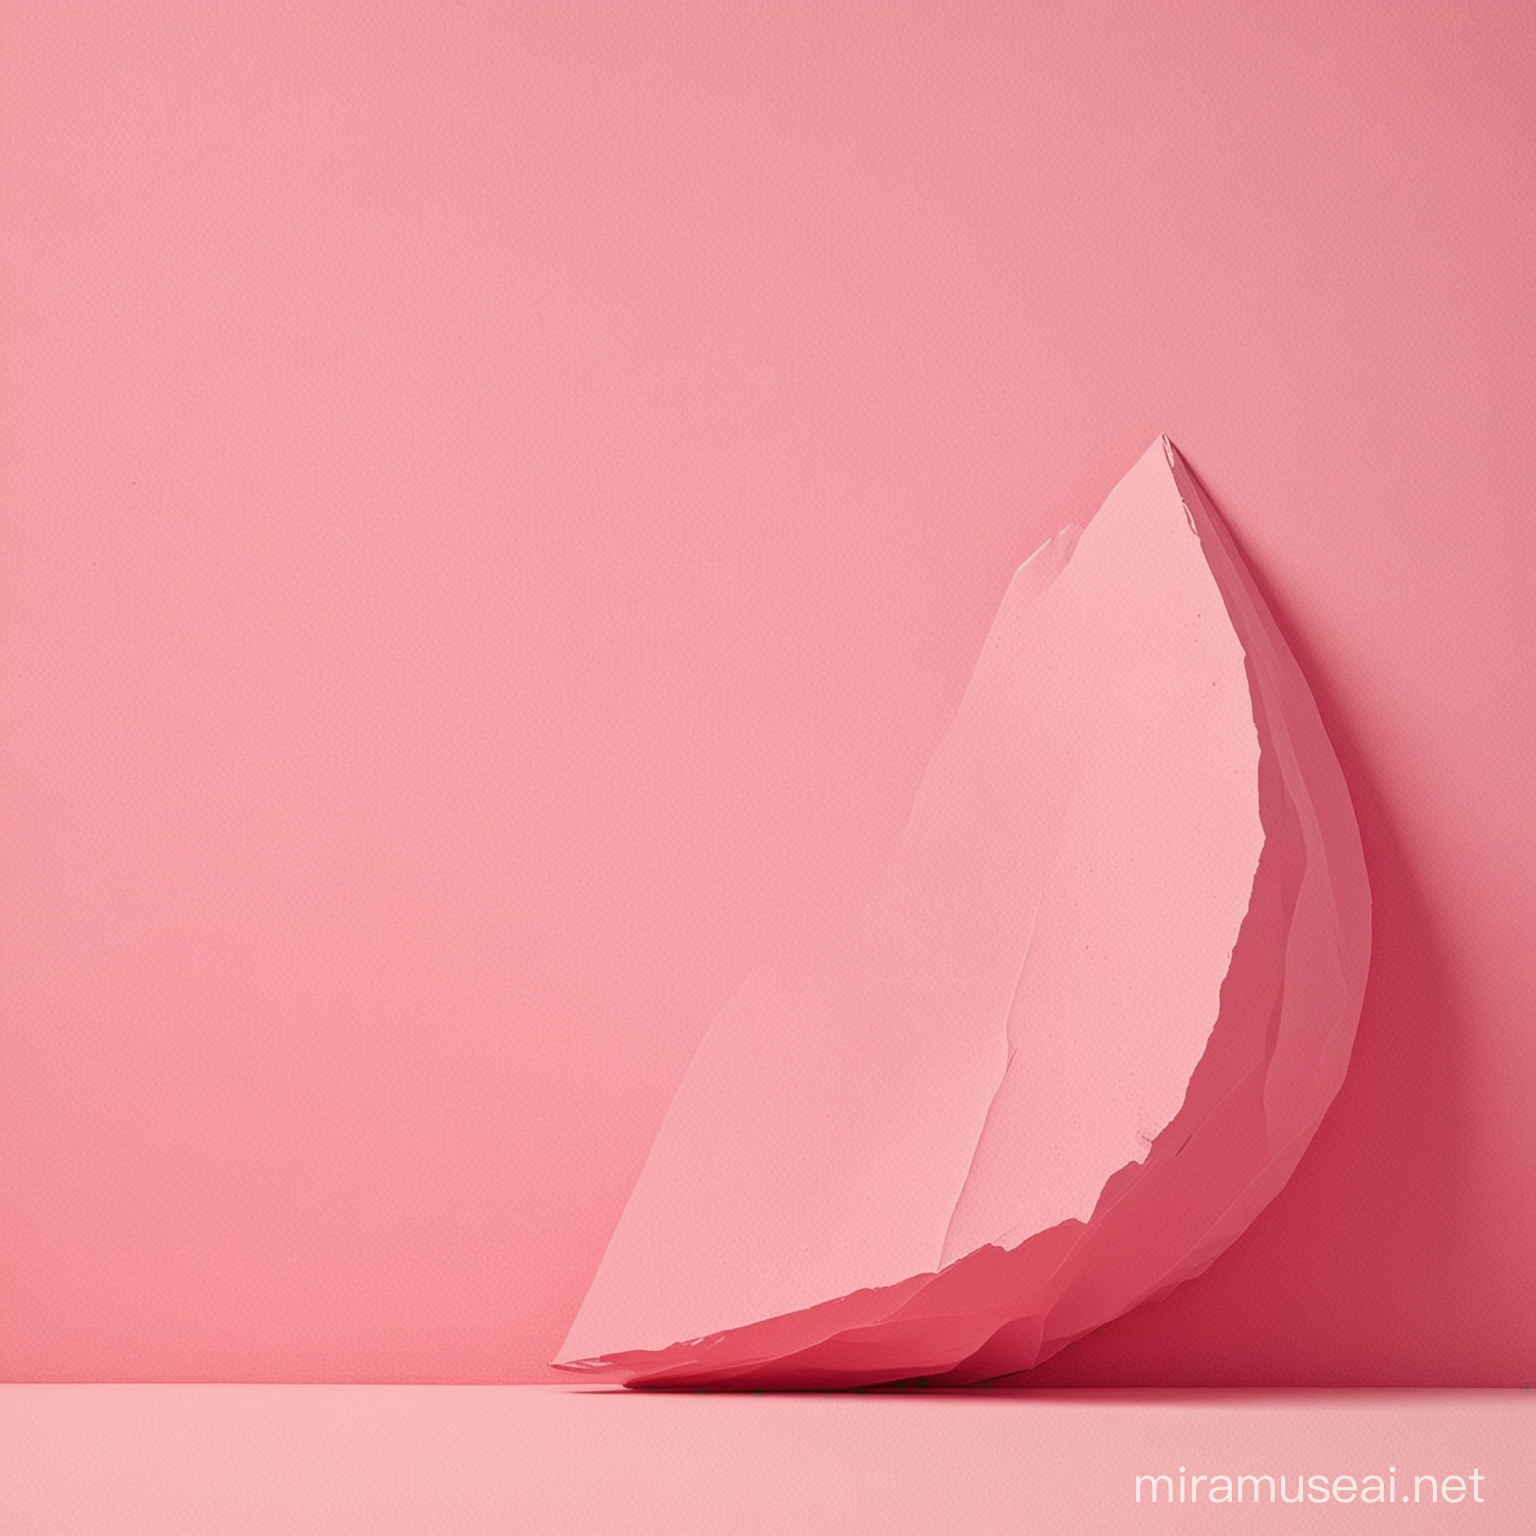 Vintage Pink Lump on Flat Background Retro Aesthetic Abstract Art